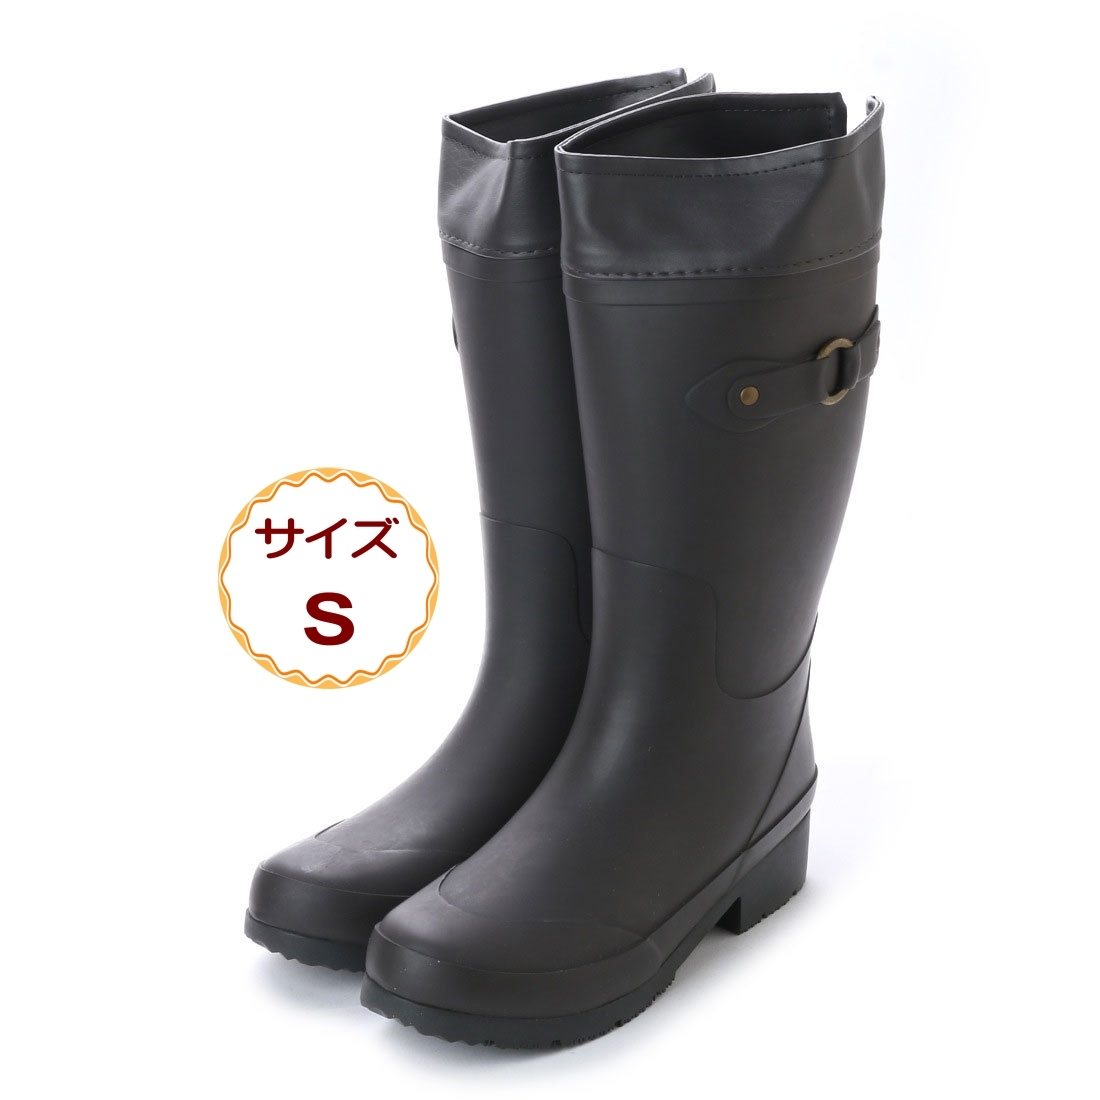  lady's long rain boots jockey boots Raver complete waterproof solid forming . slide bottom protection against cold heat insulation Brown 16032-brn-S ( 22.0 ~ 22.5cm )